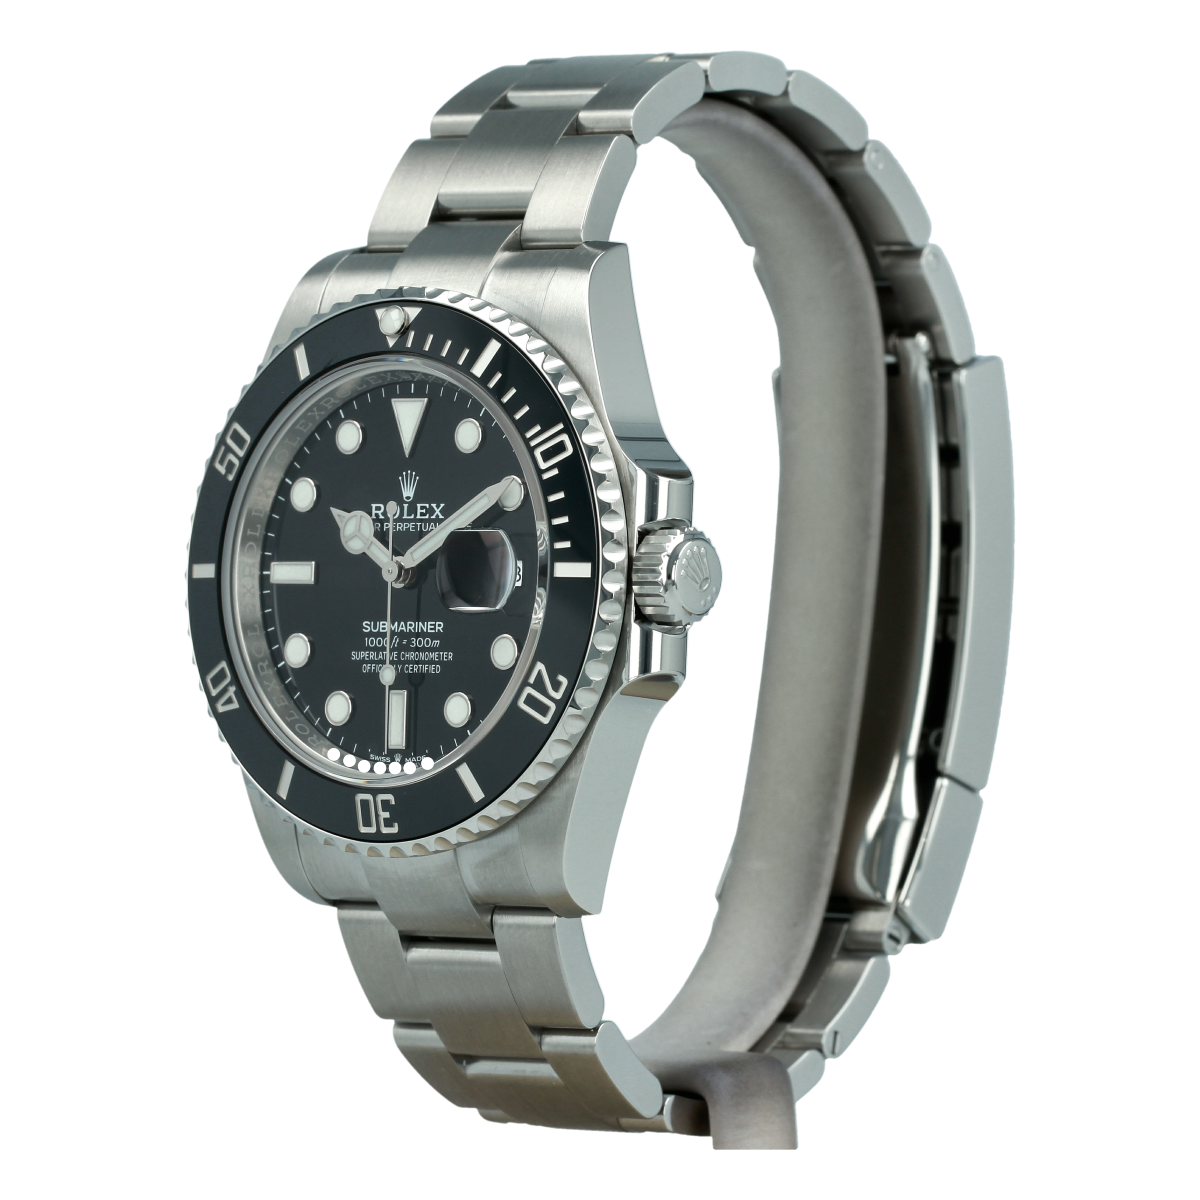 Rolex Submariner Date ln New Model Buy Pre Owned Rolex Watch